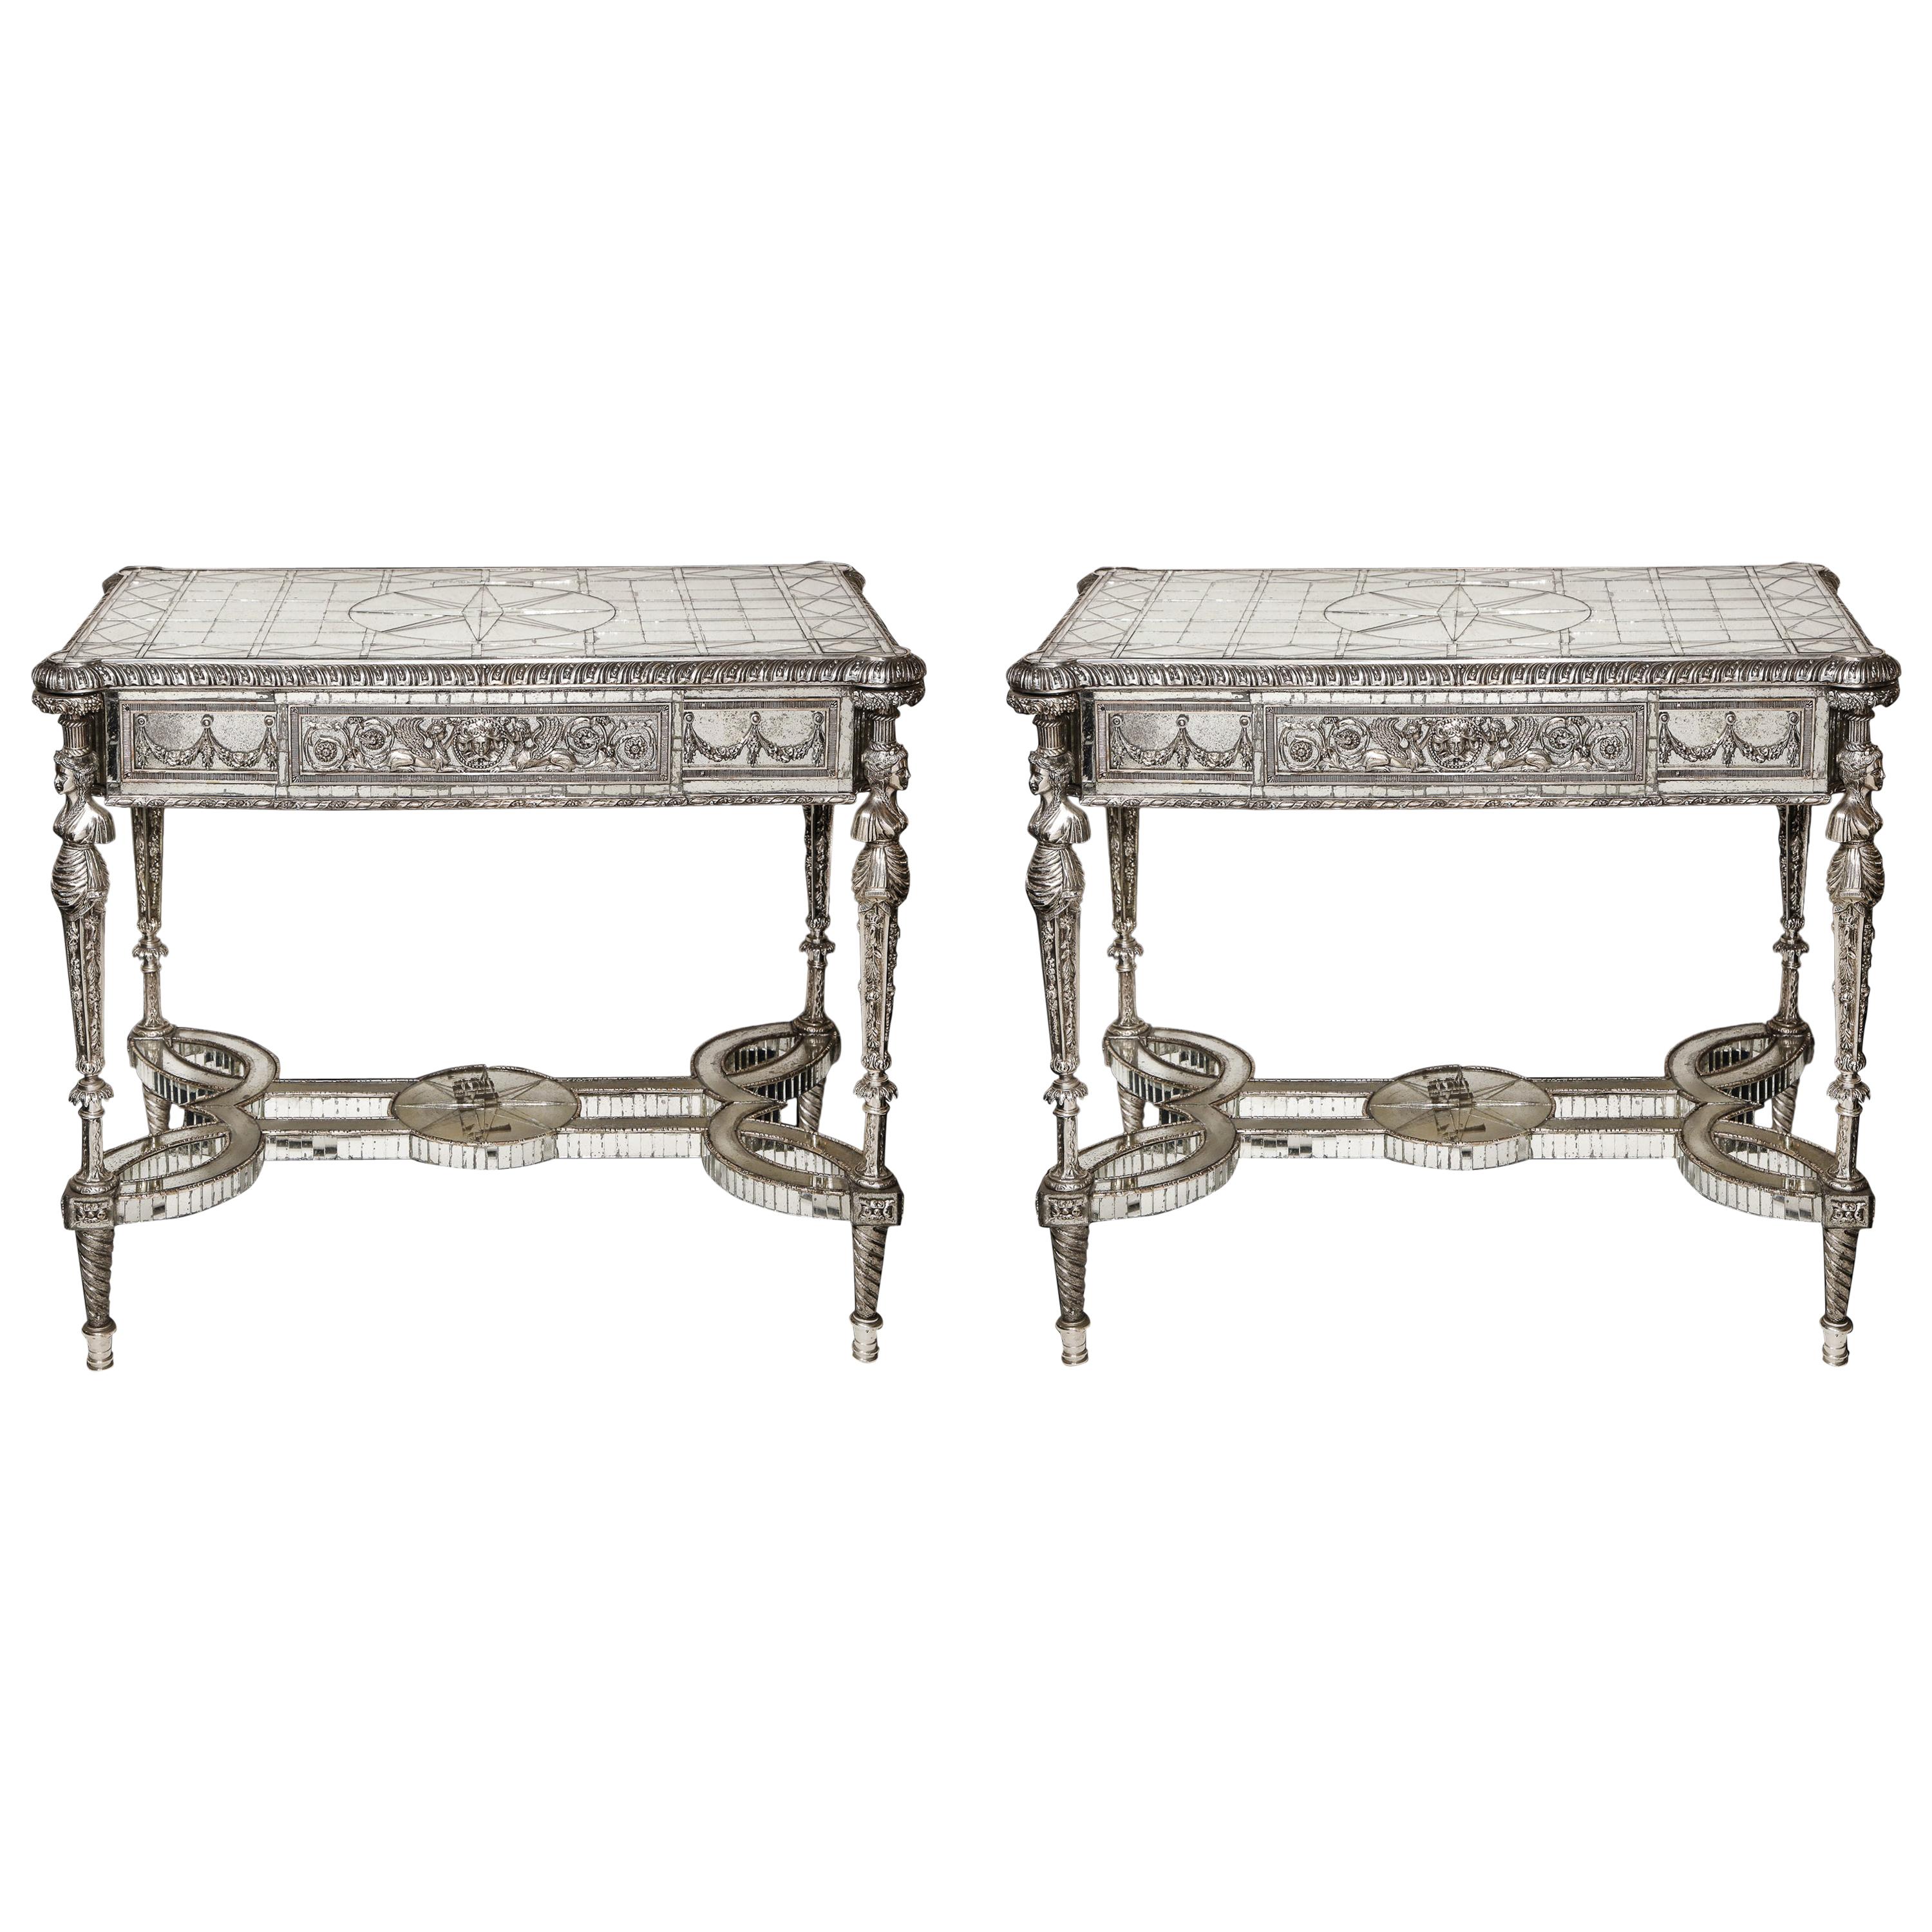 Pair of Superb French Louis XVI Style Silver Bronze and Antiqued Mirrored Tables